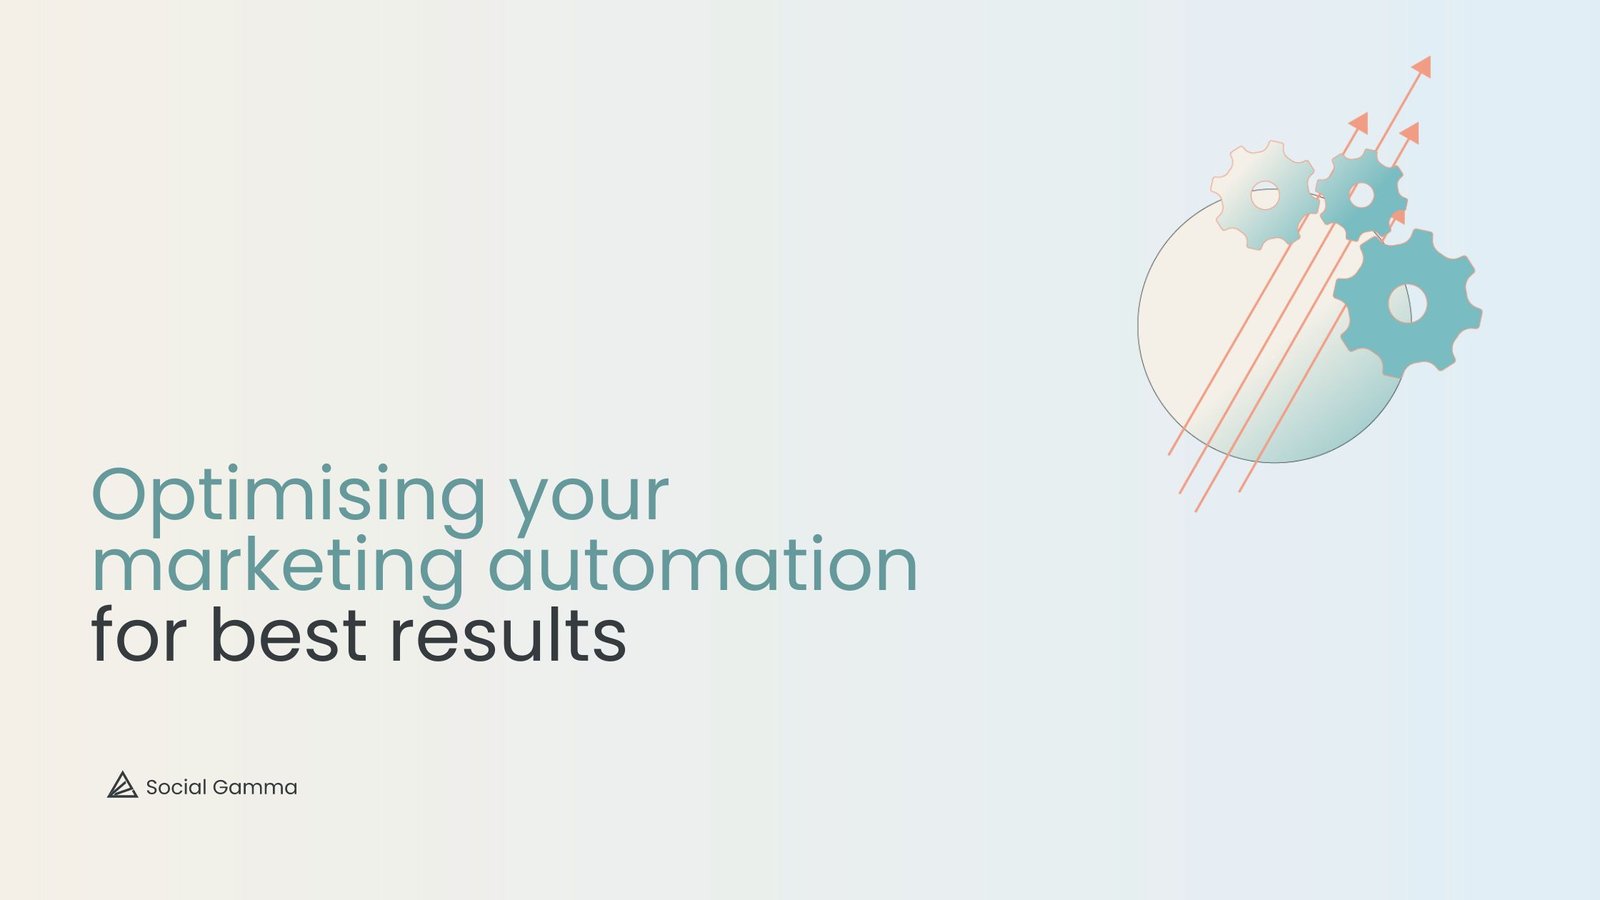 Optimising your marketing automation for best results